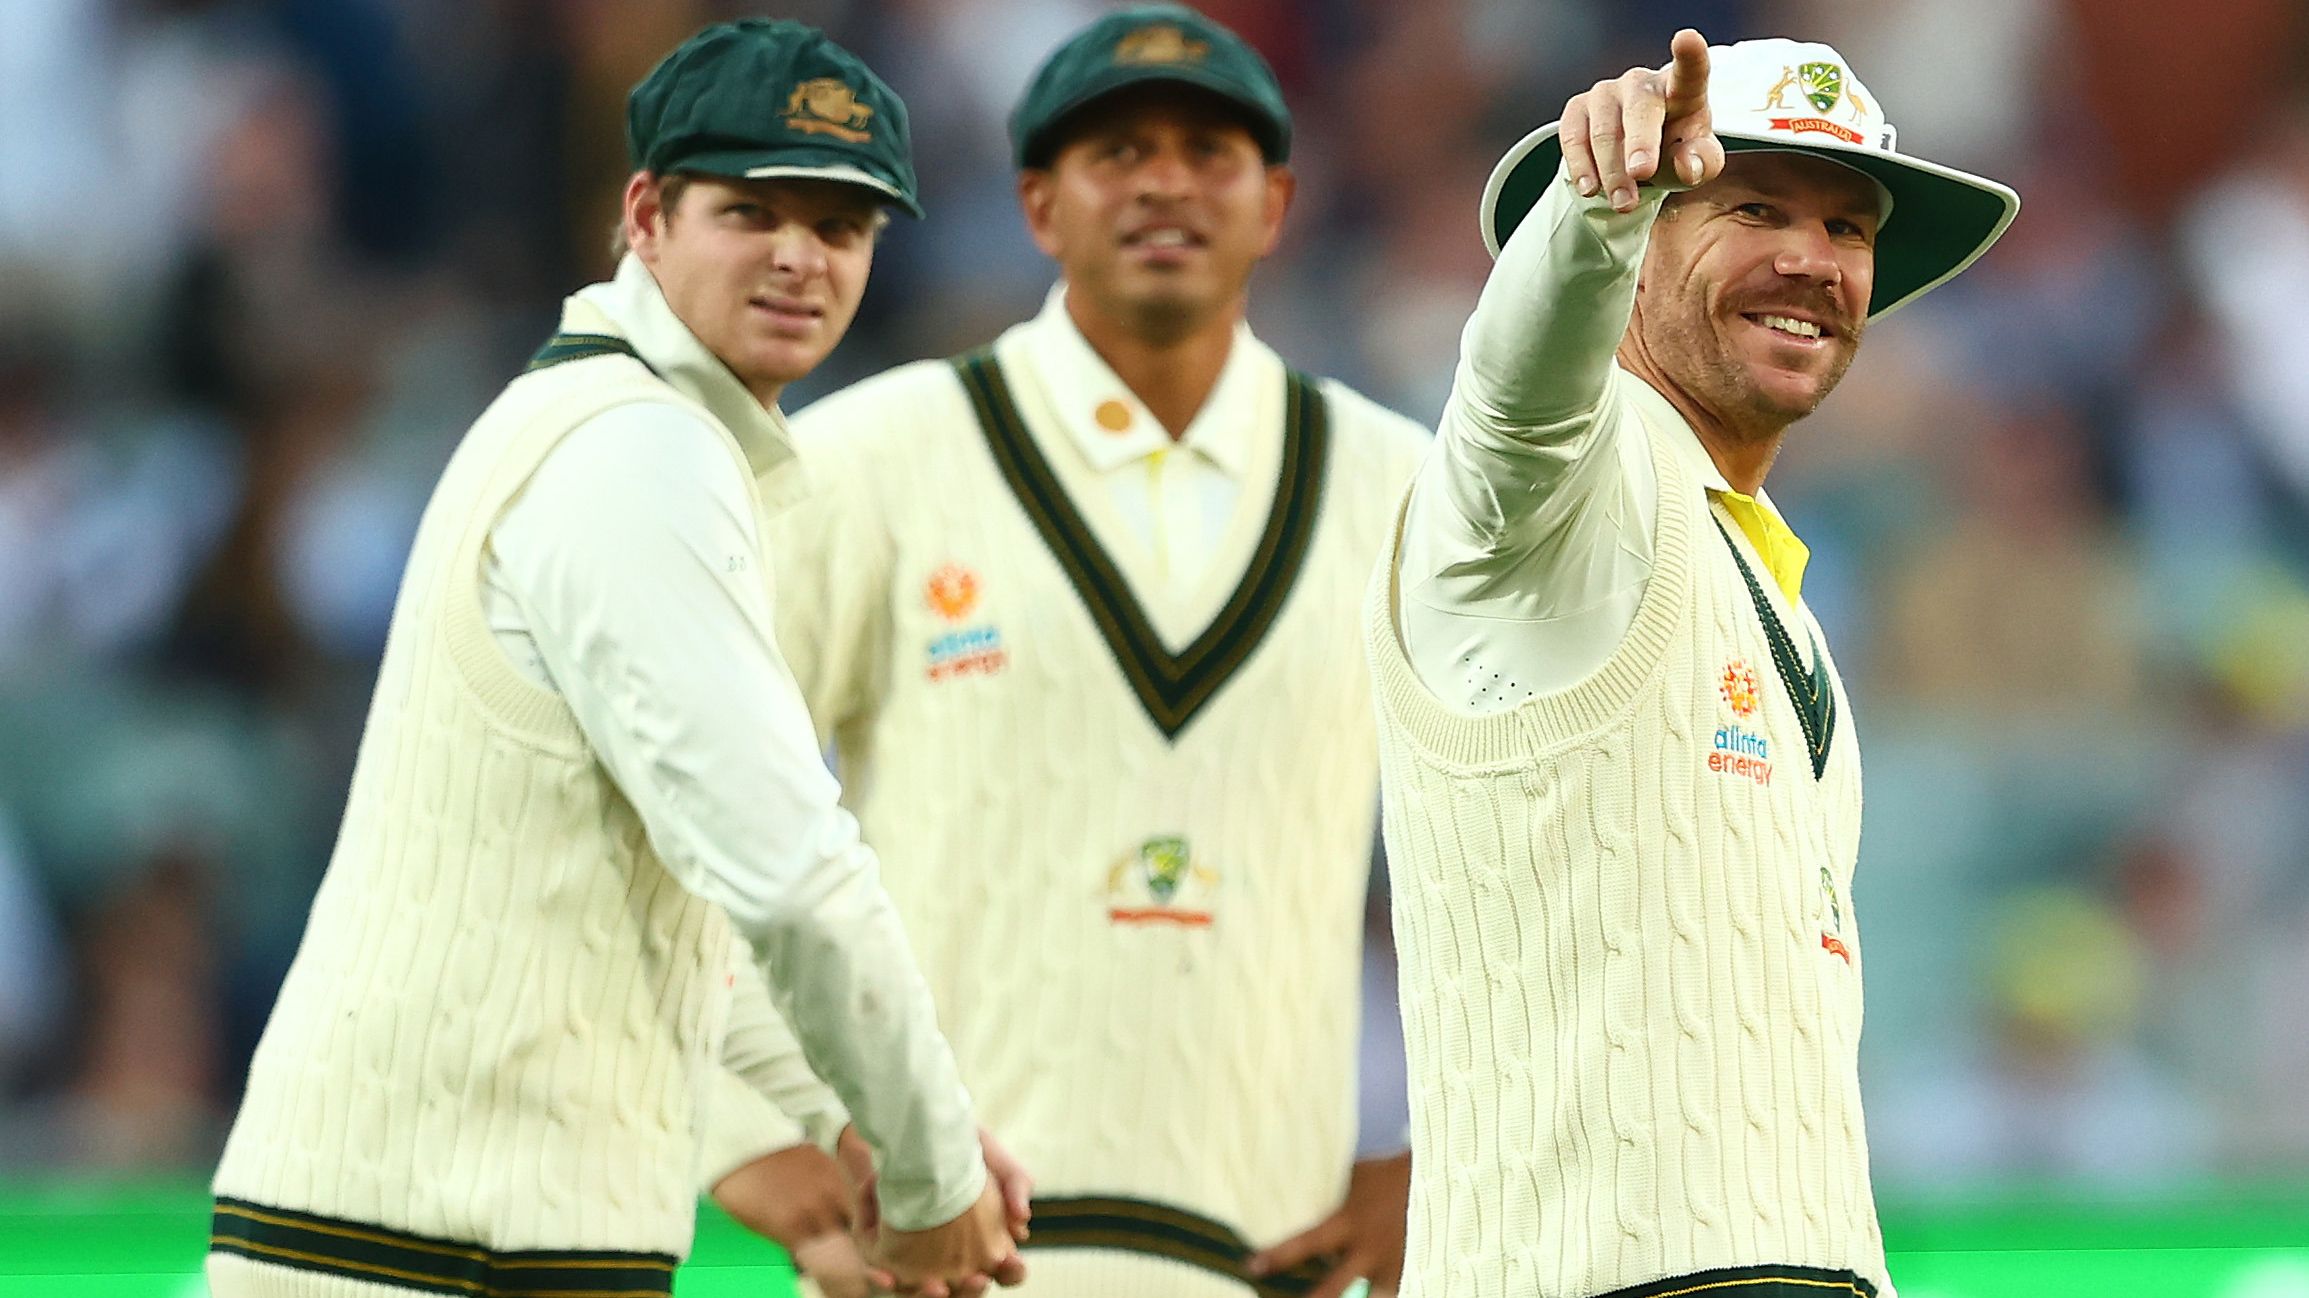 ADELAIDE, AUSTRALIA - DECEMBER 09:  David Warner, Steve Smith and Usman Khawaja of Australia look on during day two of the Second Test Match in the series between Australia and the West Indies at Adelaide Oval on December 09, 2022 in Adelaide, Australia. (Photo by Chris Hyde/Getty Images)